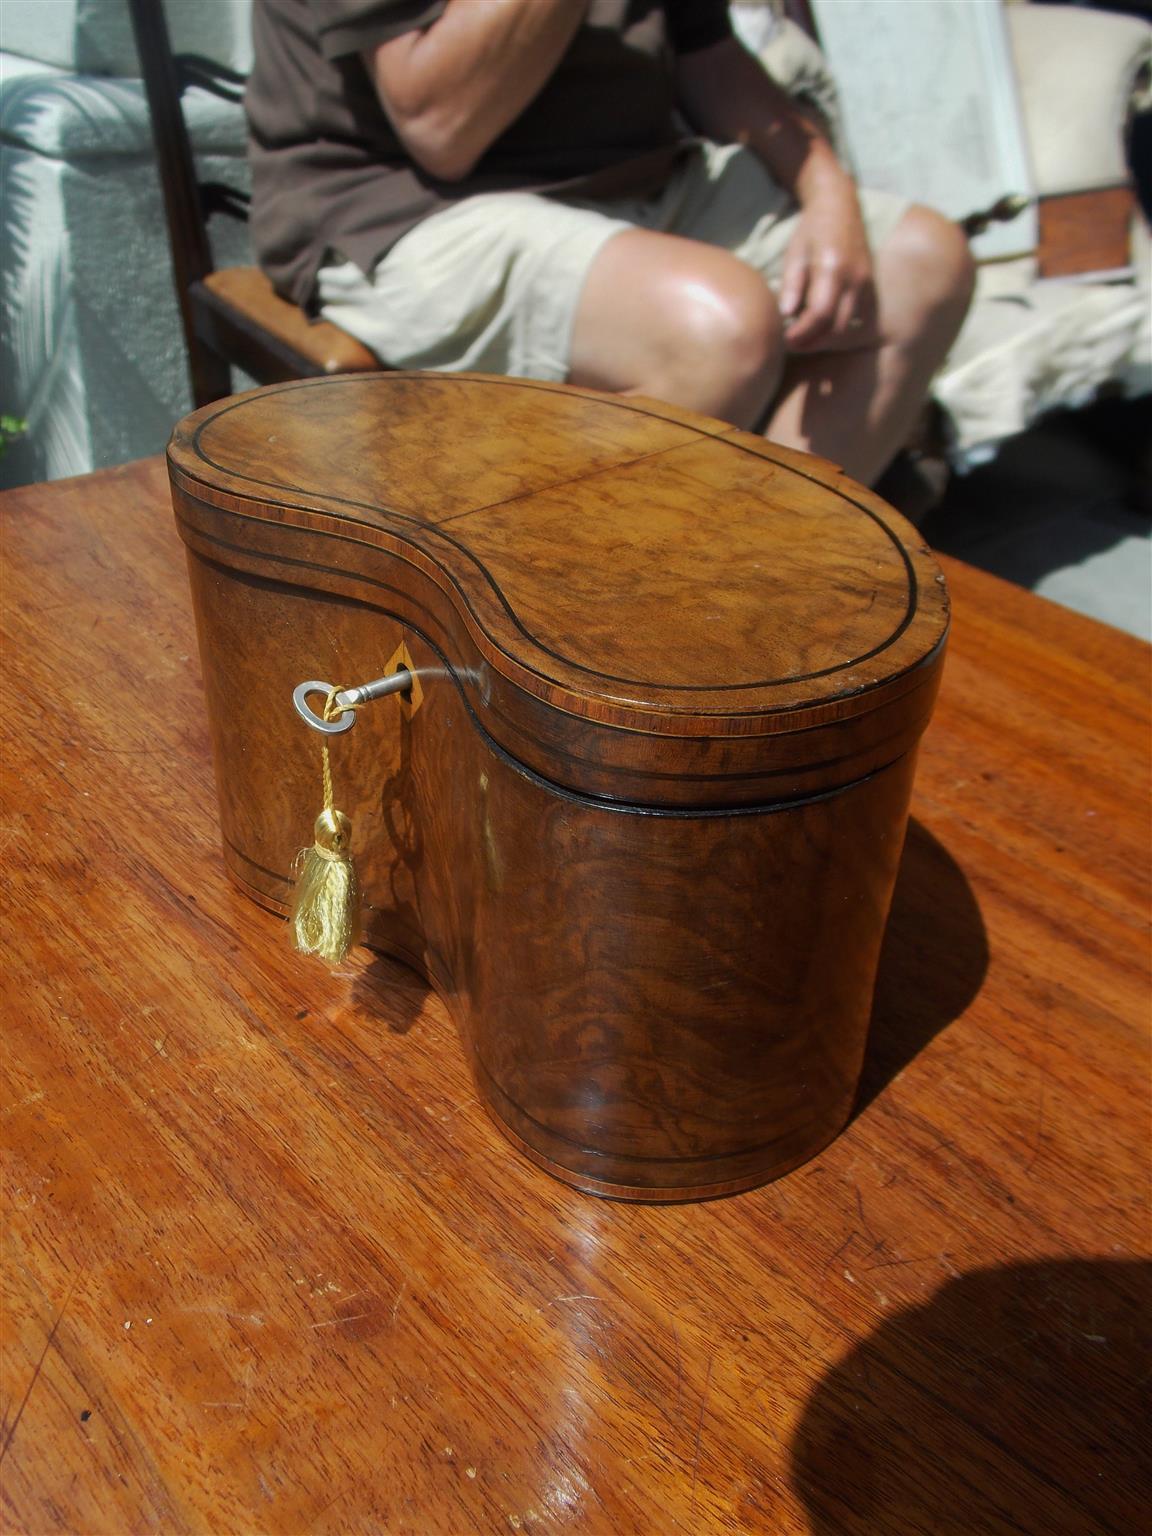 English burl walnut hinged kidney shaped tea caddy with ebony string inlay, tulip wood cross banding, diamond inlaid escutcheon with key, and fitted with original foil lined interior, Early 19th century.